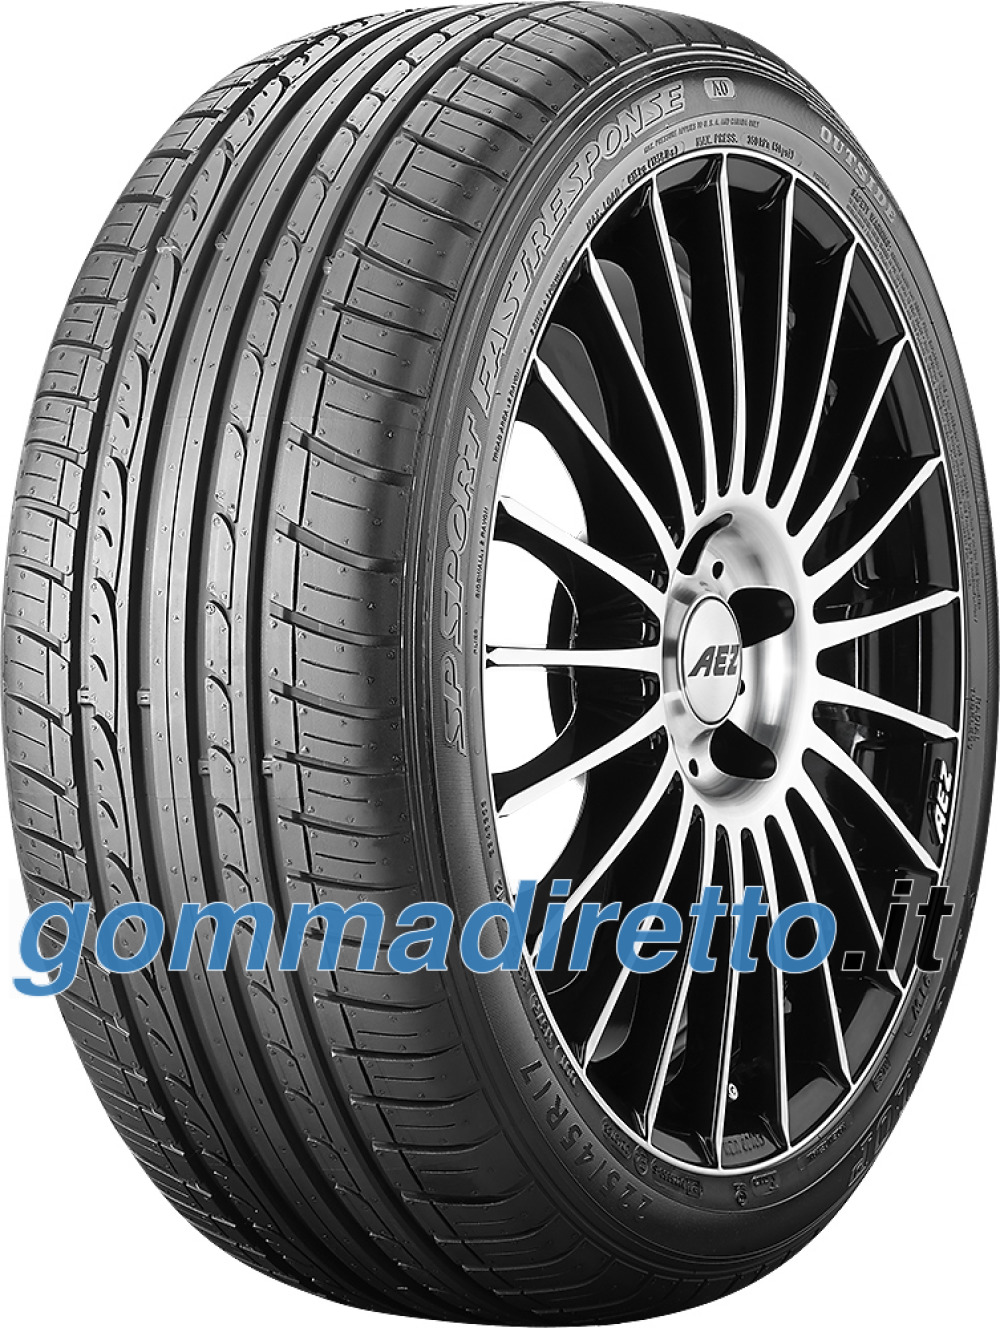 Image of        Dunlop SP Sport FastResponse ( 225/45 R17 94Y XL AO )